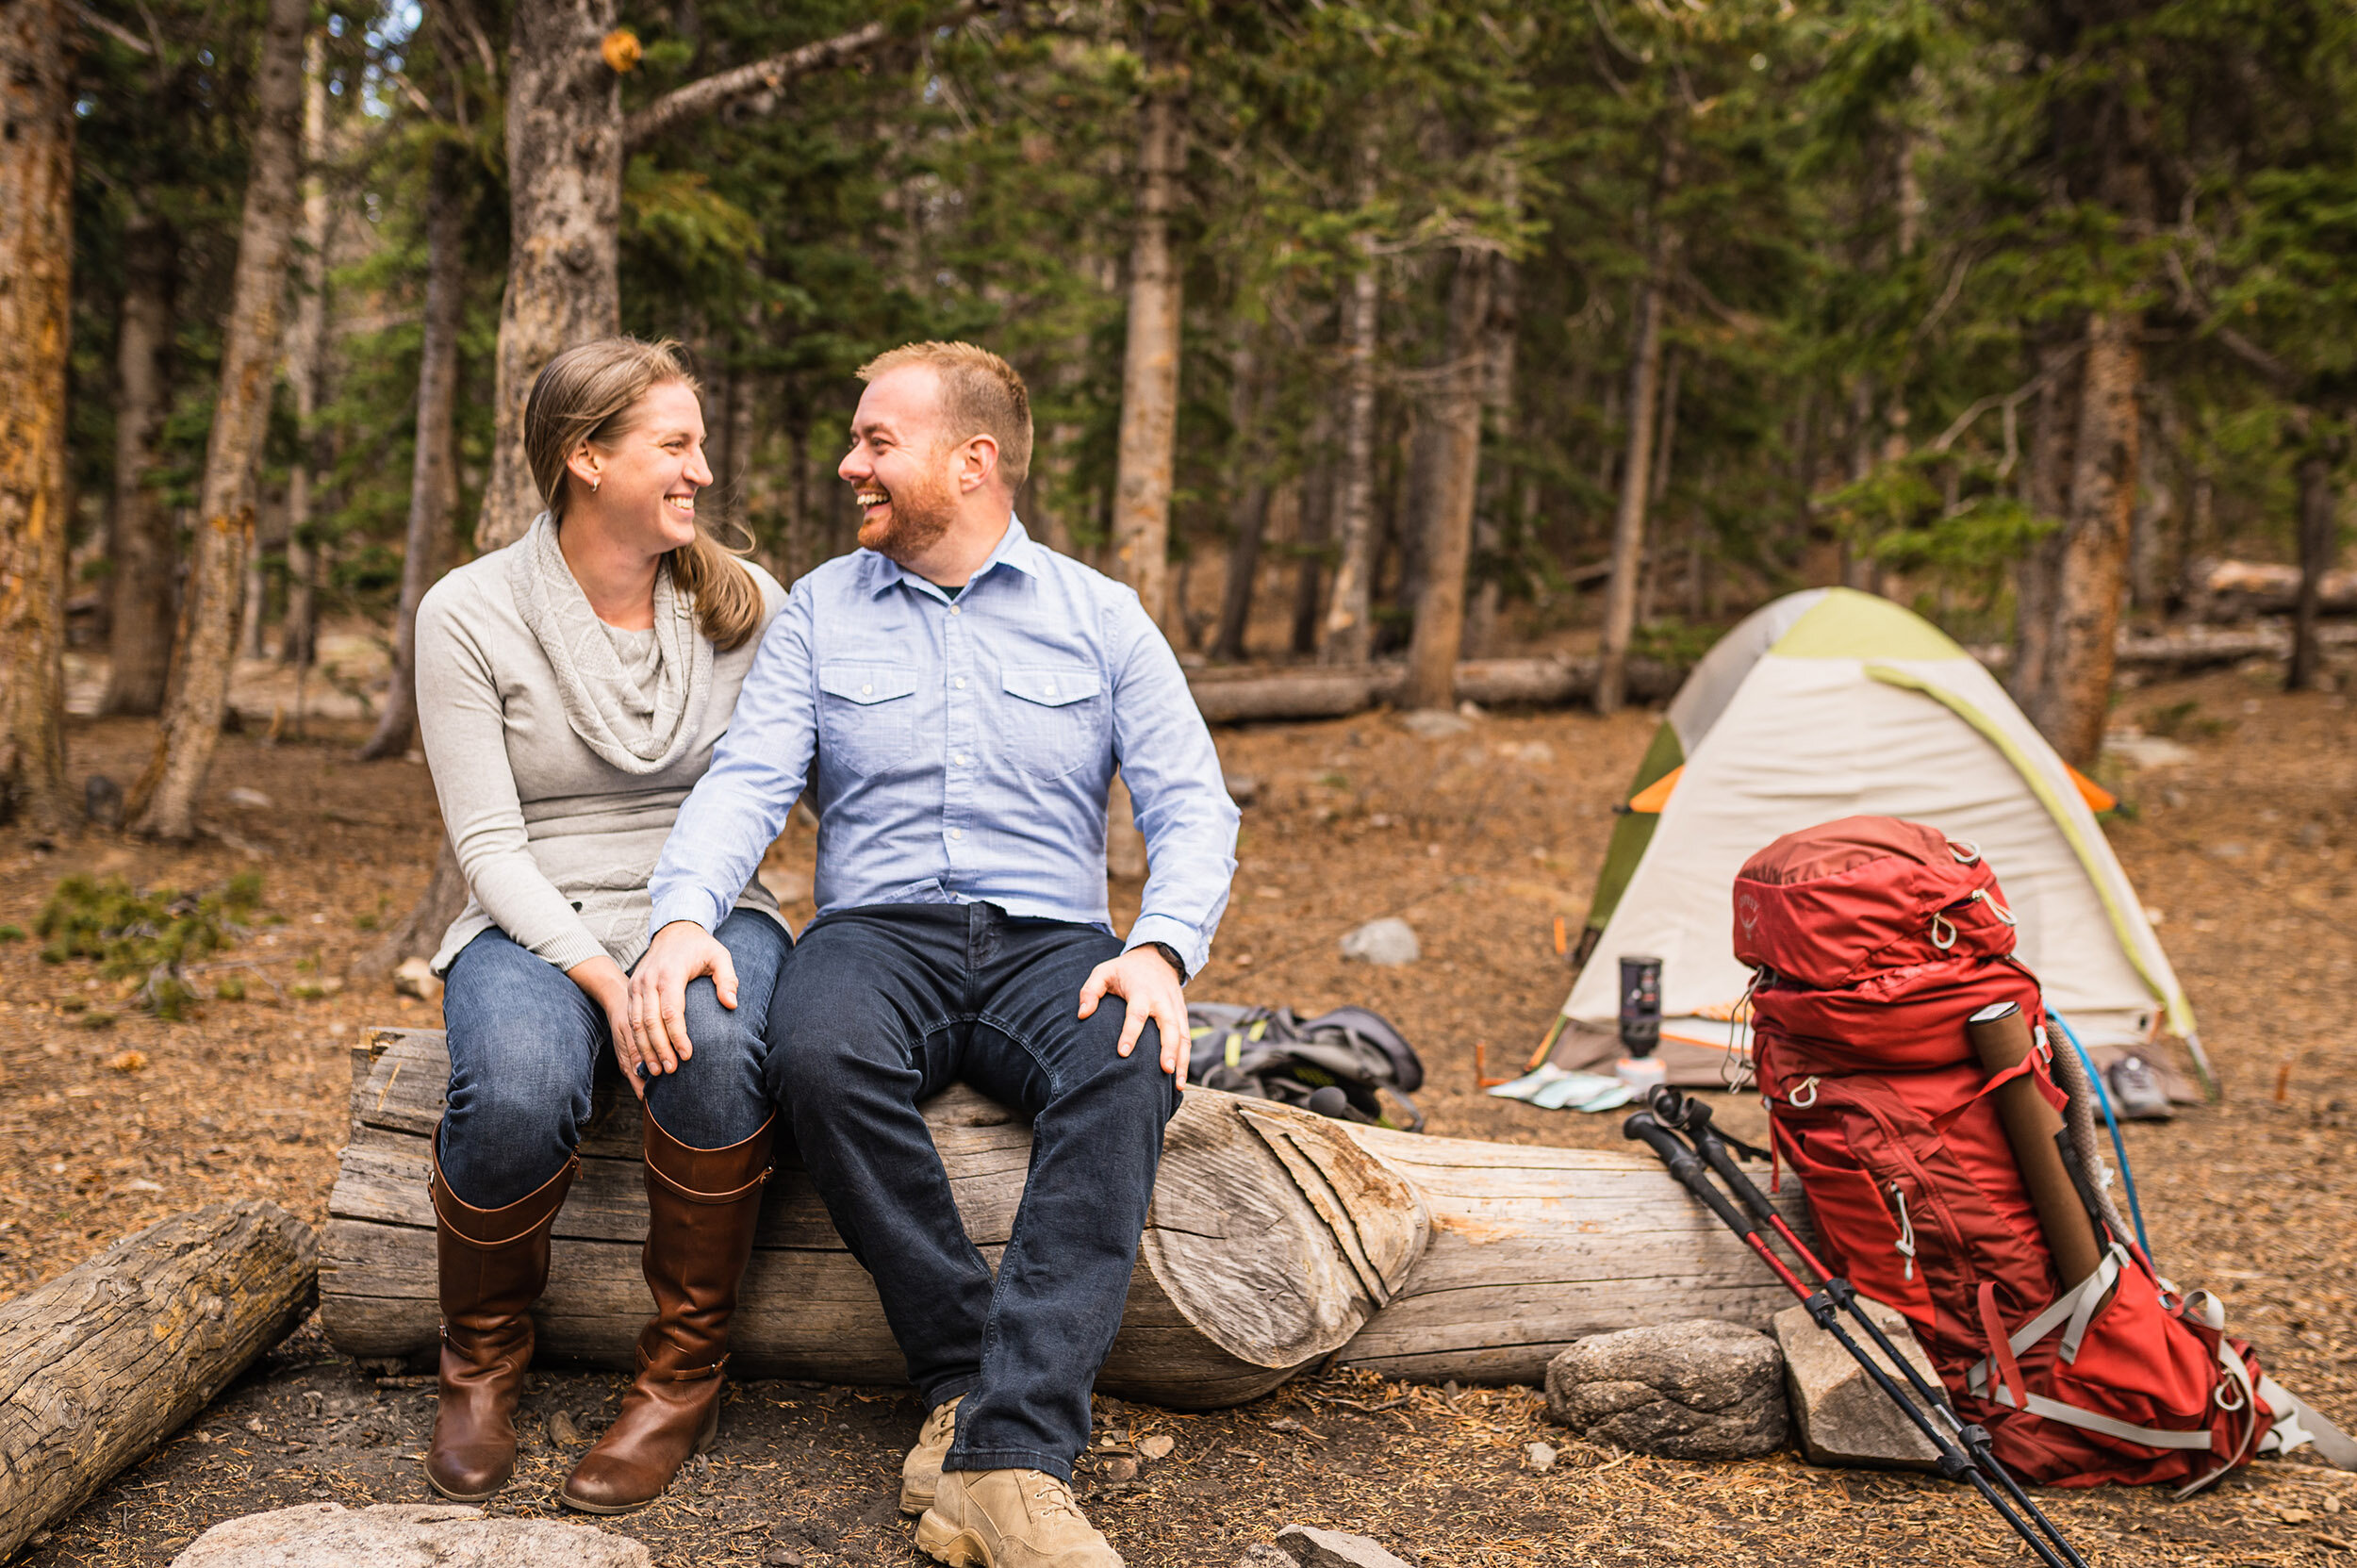 lost-lake-colorado-engagement-photographer-adventure-camping-hiking-fly-fishing (1).jpg